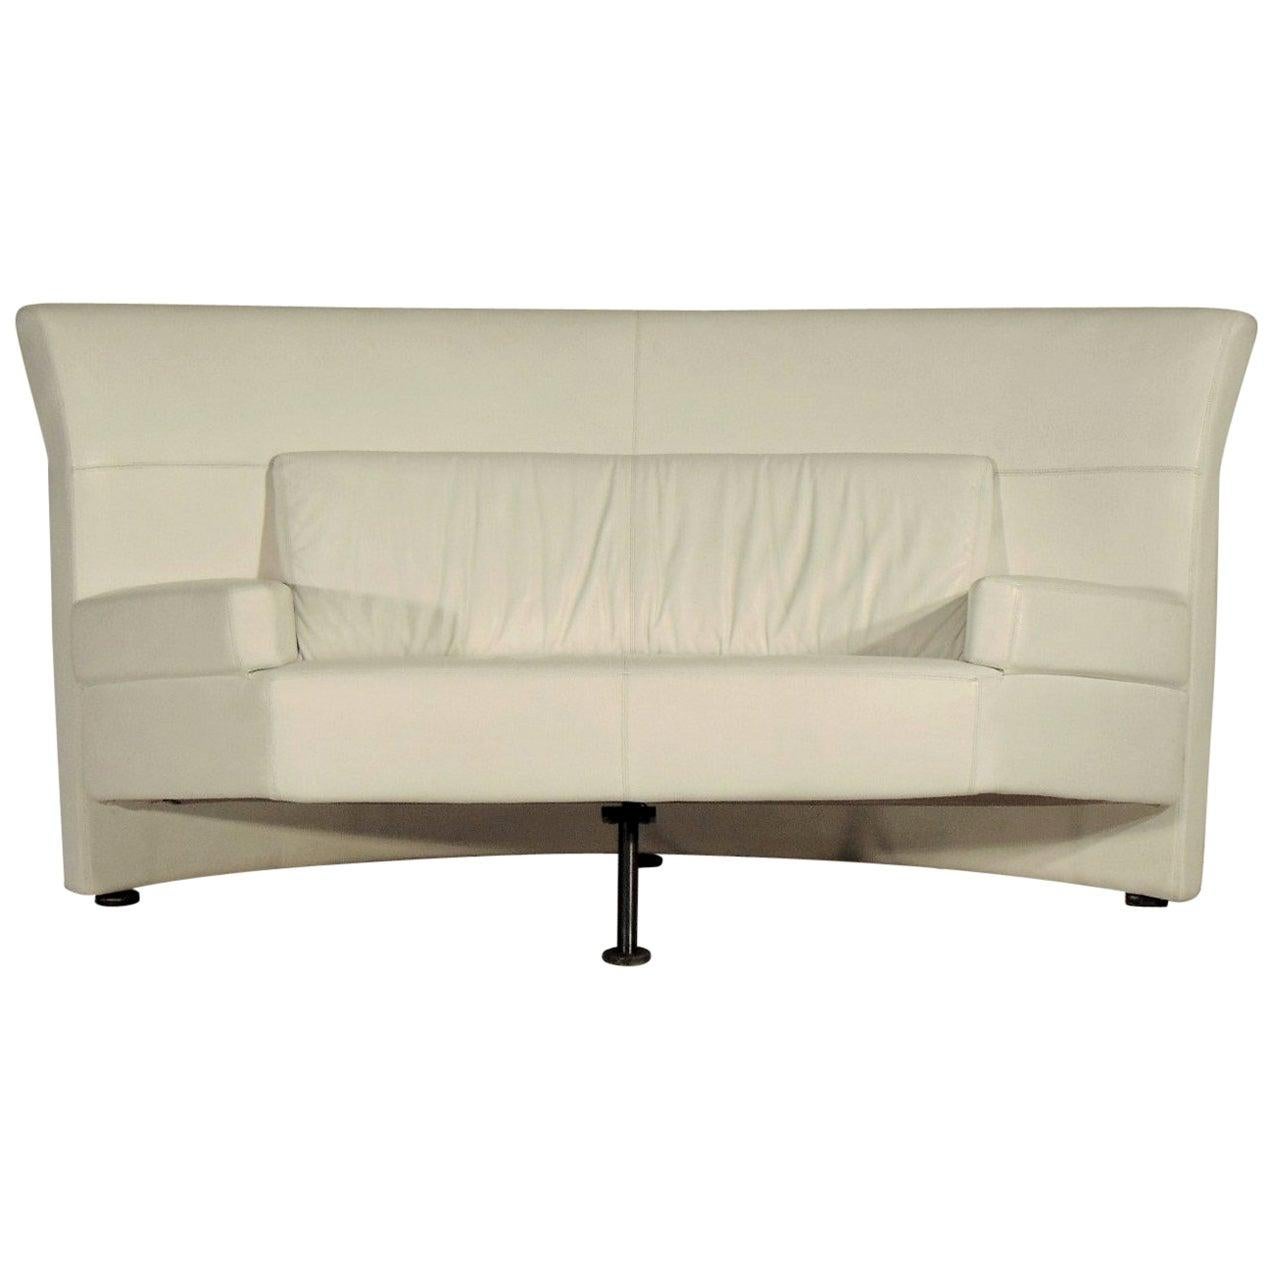 1988 Loveseat White Leather by Walter Leeman Memphis Style, Sormani, Italy For Sale